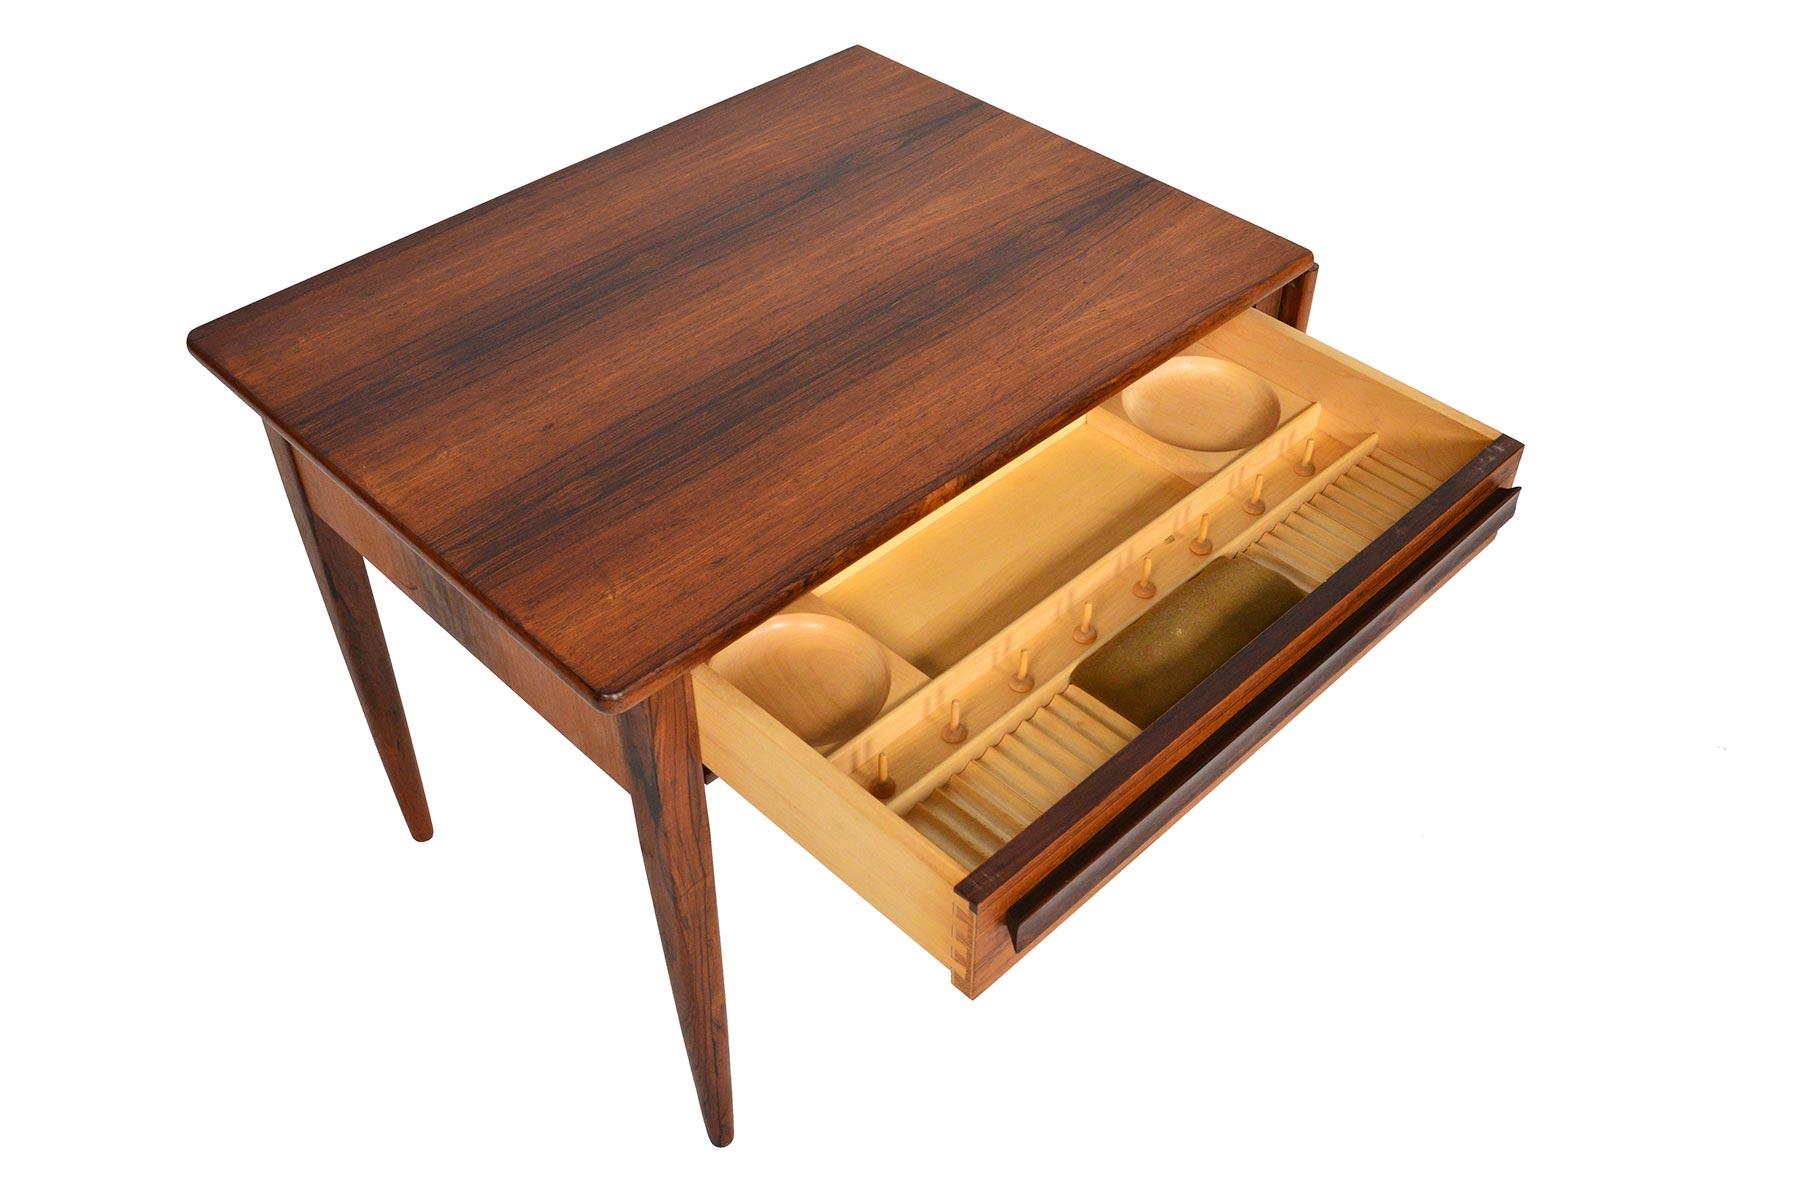 This beautiful Danish modern midcentury sewing box was designed by Johannes Andersen for CFC Silkeborg in the 1960s. A drop leaf can be extended to expand the work surface. A top drawer crafted in oak features multiple compartments for notion